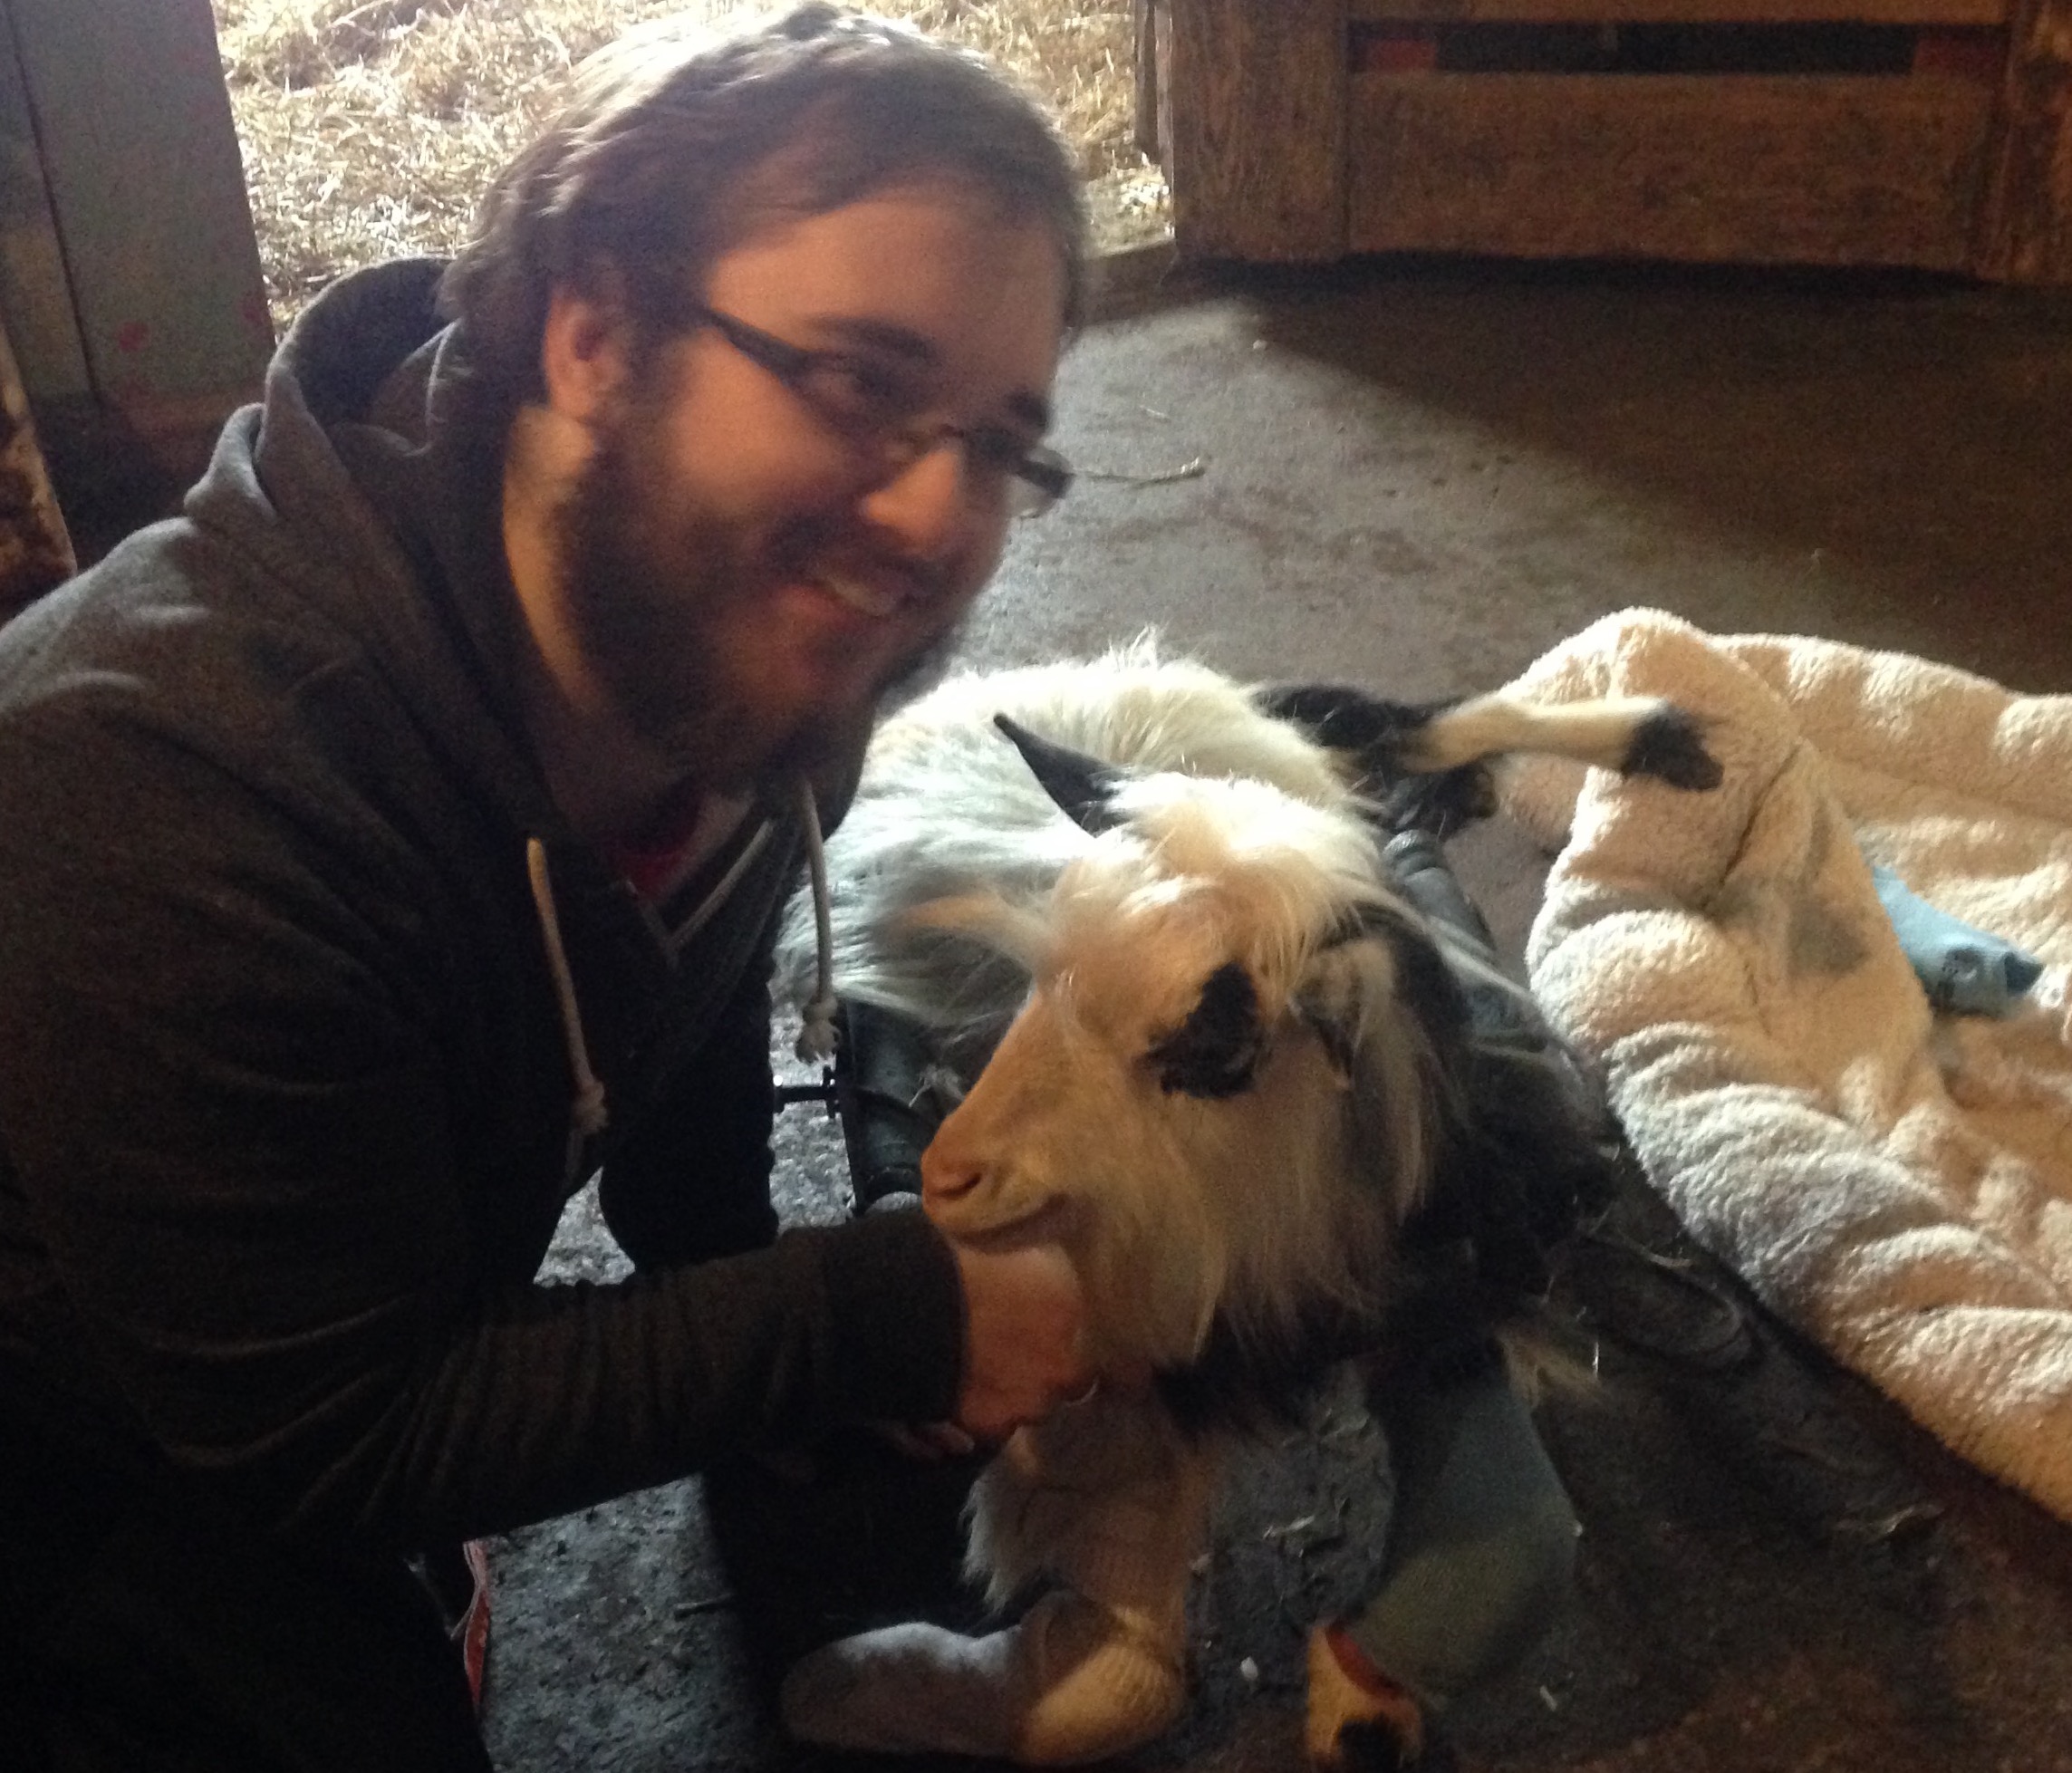 Younger Robin posting with a goat